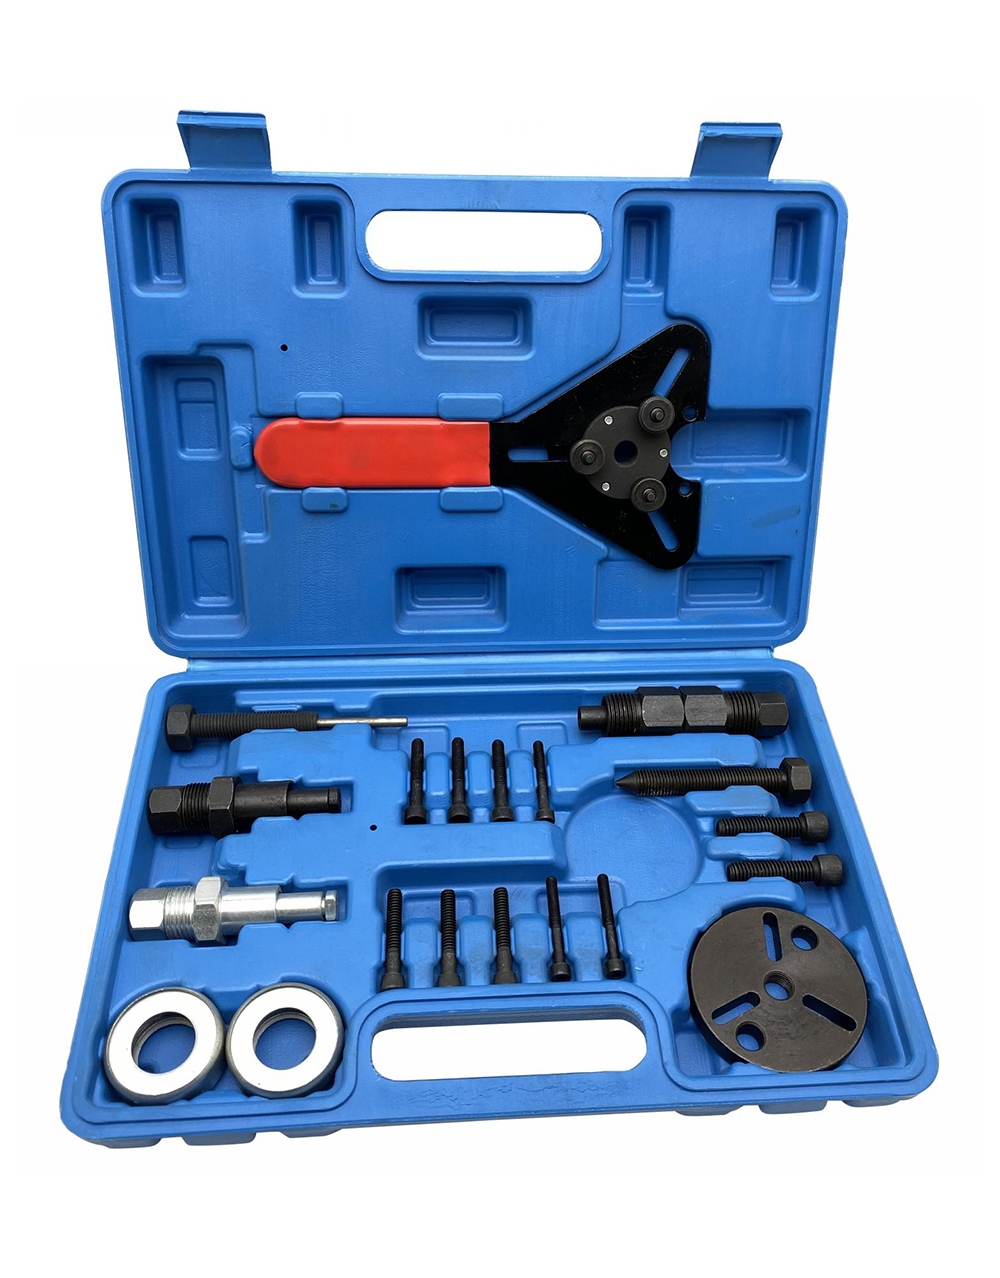  Automorive Air Condition Clutch Tool Kit